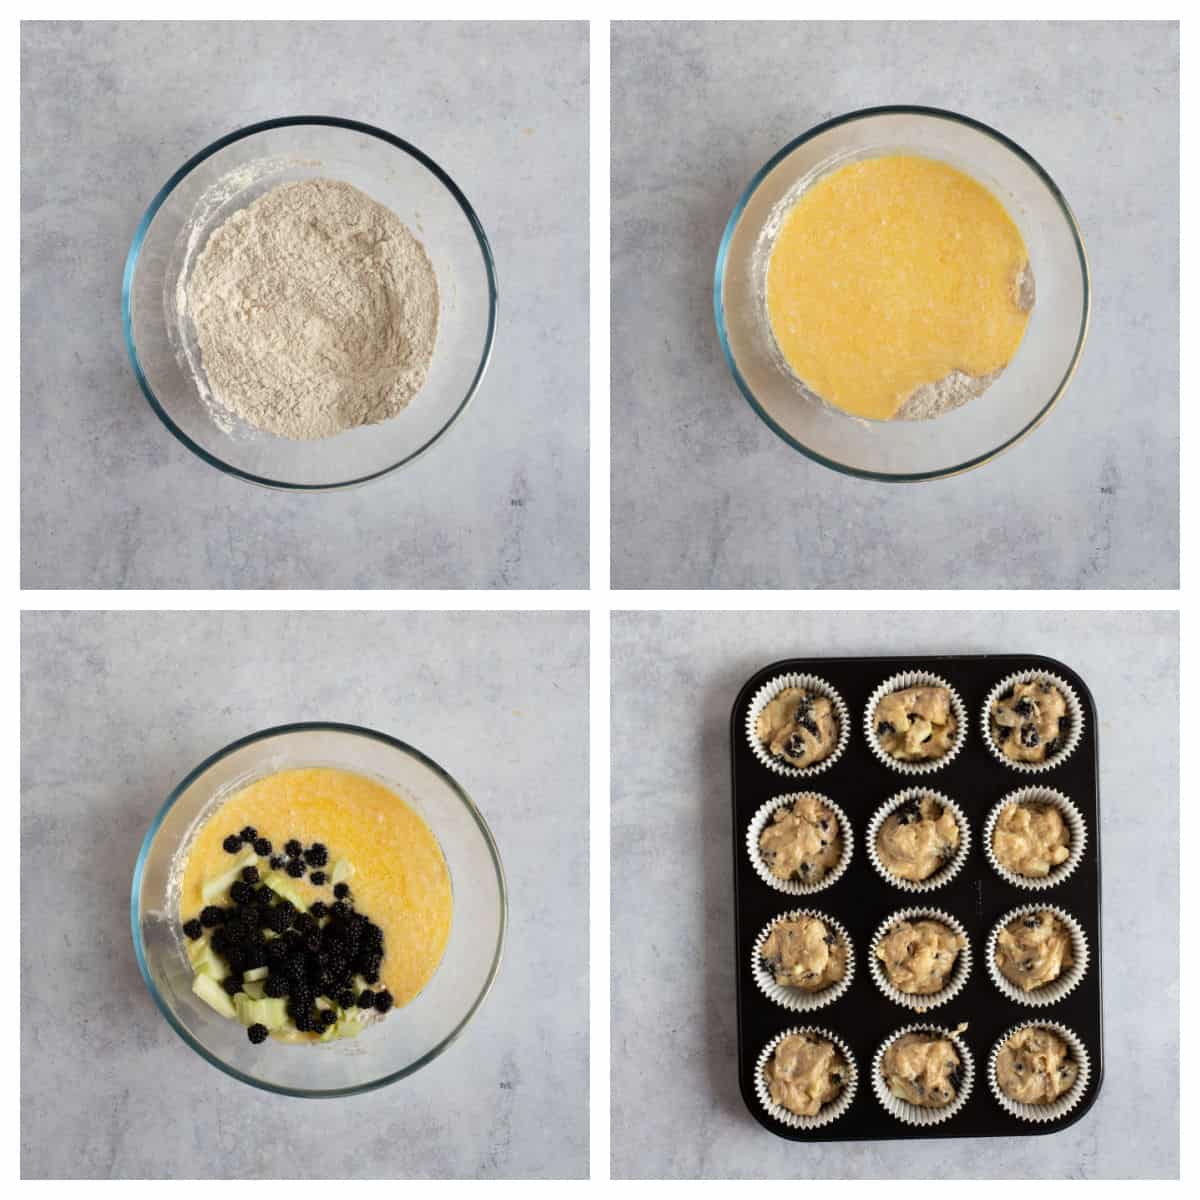 Step-by-step photo instructions for making muffins.